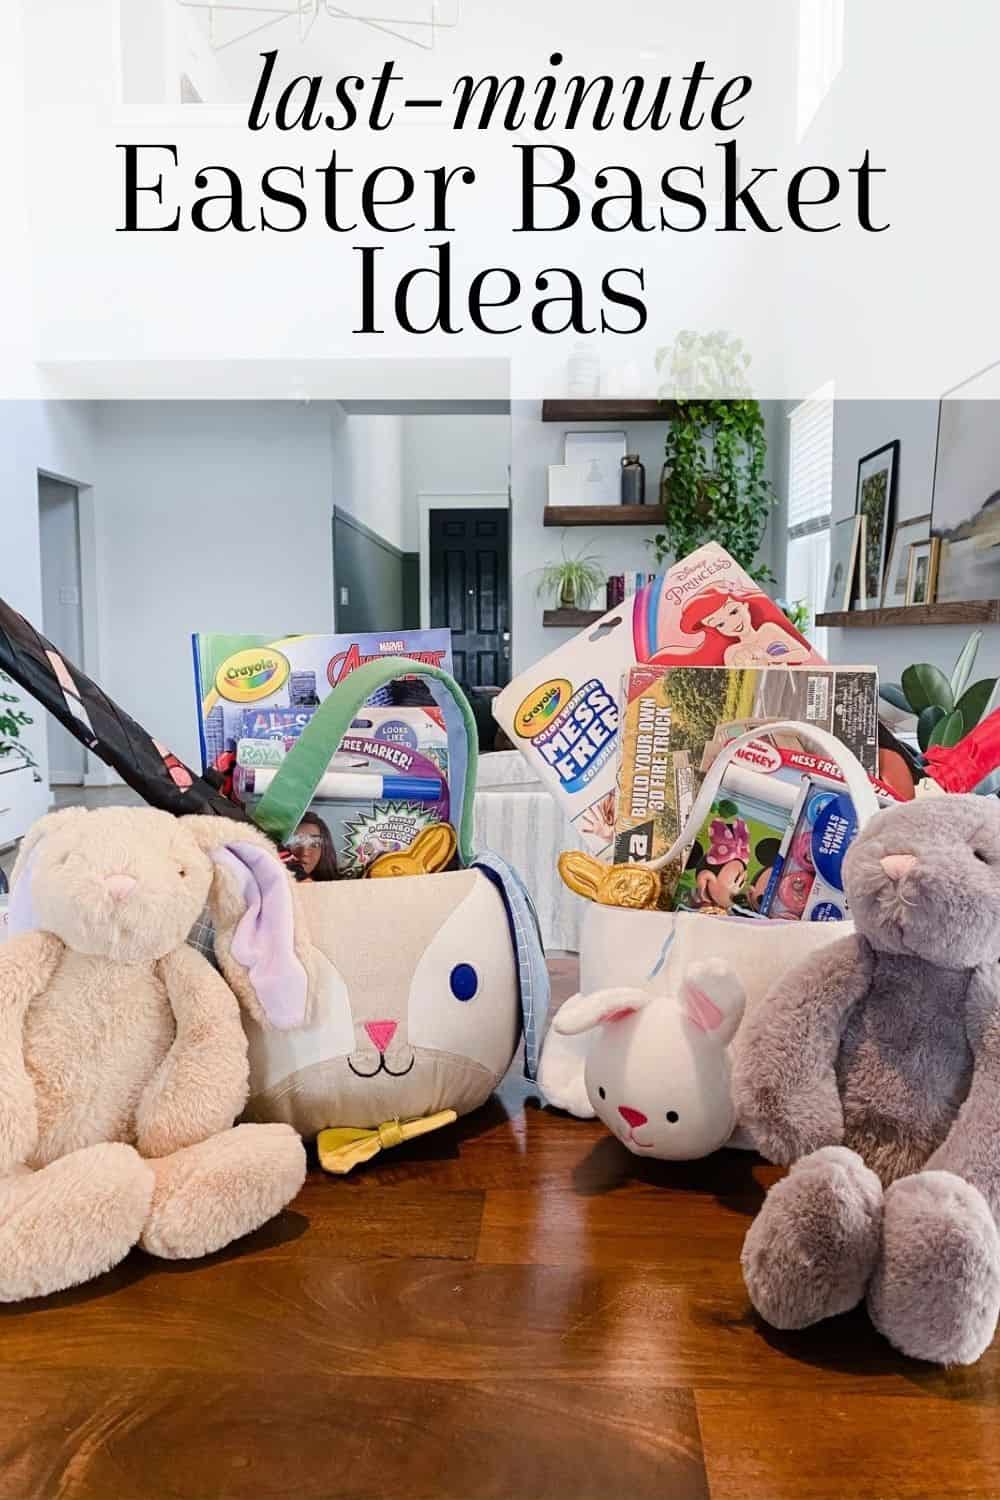 Easter Basket Ideas for the Kids